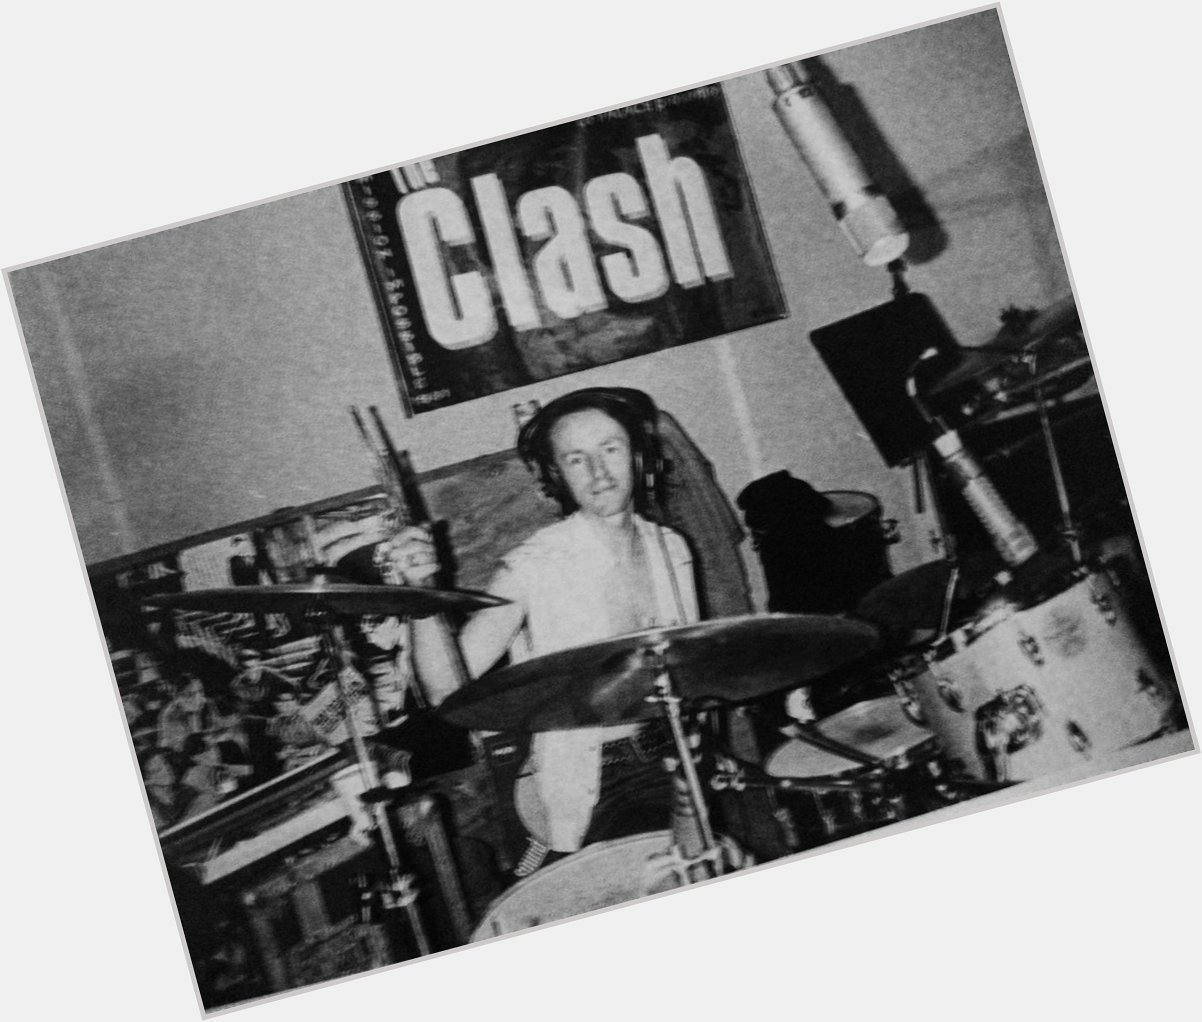 Happy Birthday to the one and only Drummer Topper Headon of The Clash!!! 